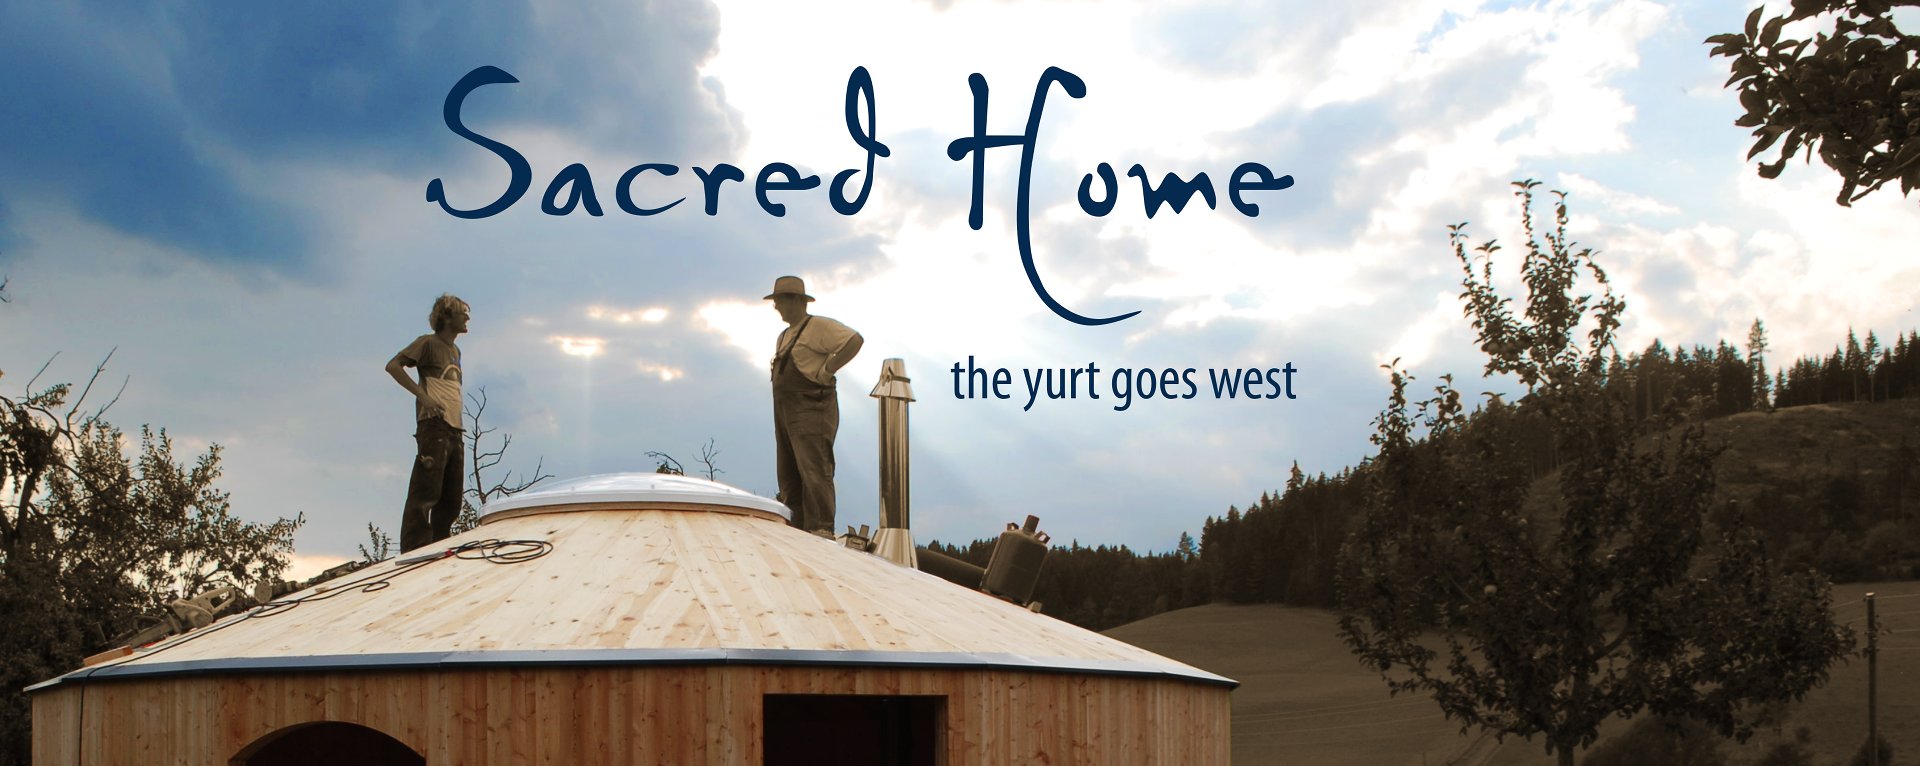 Sacred Home - the yurt goes west